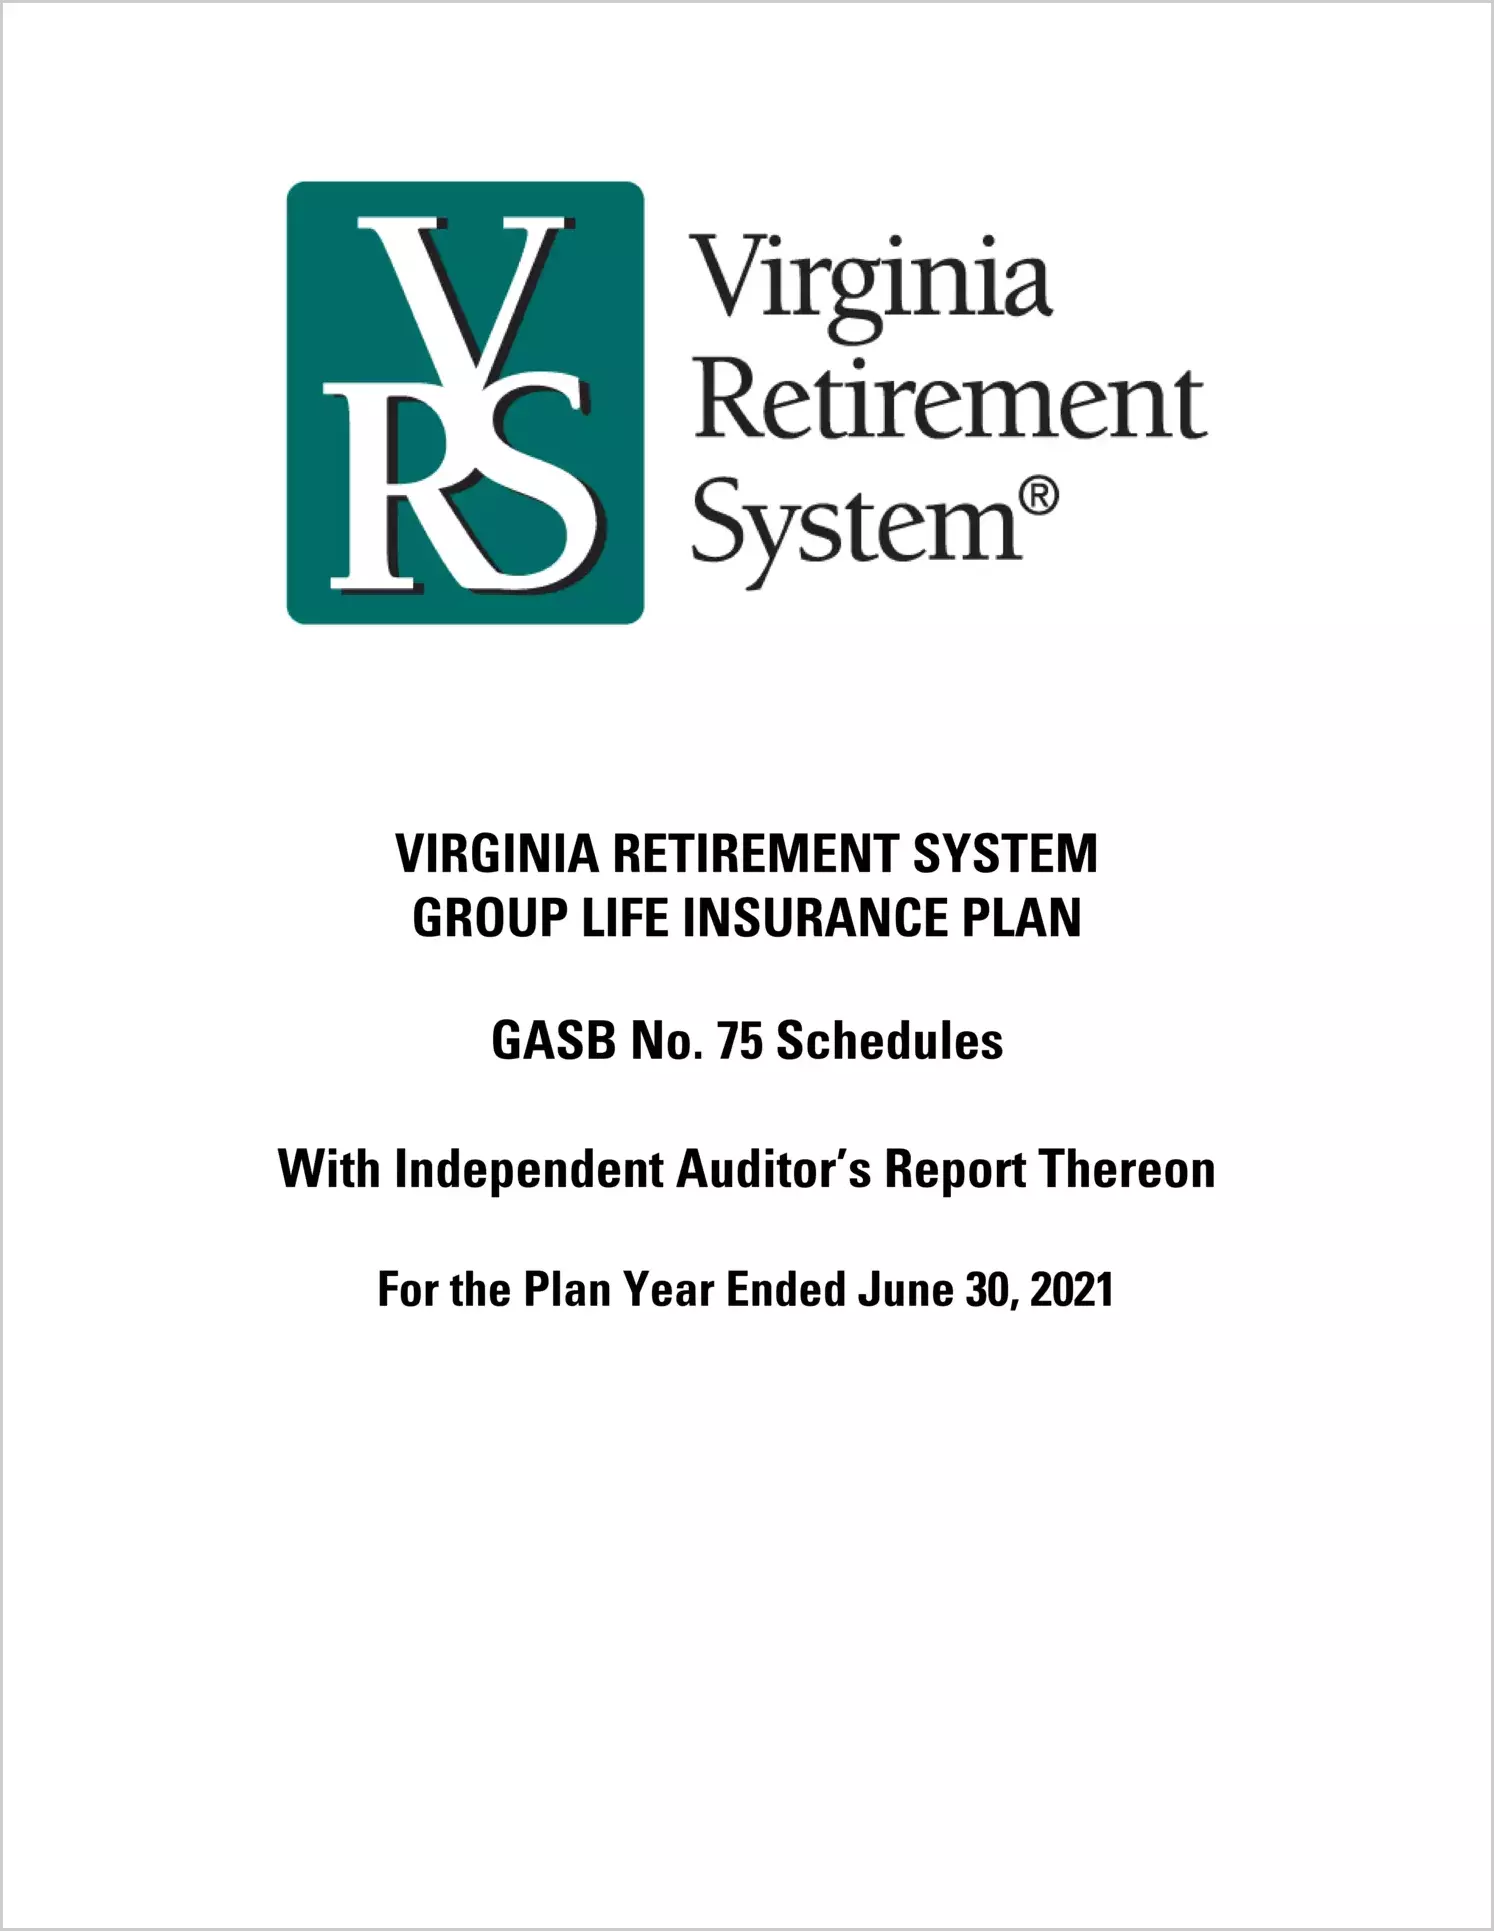 GASB 75 Schedules - Virginia Retirement System Group Life Insurance Plan for the year ended June 30, 2021